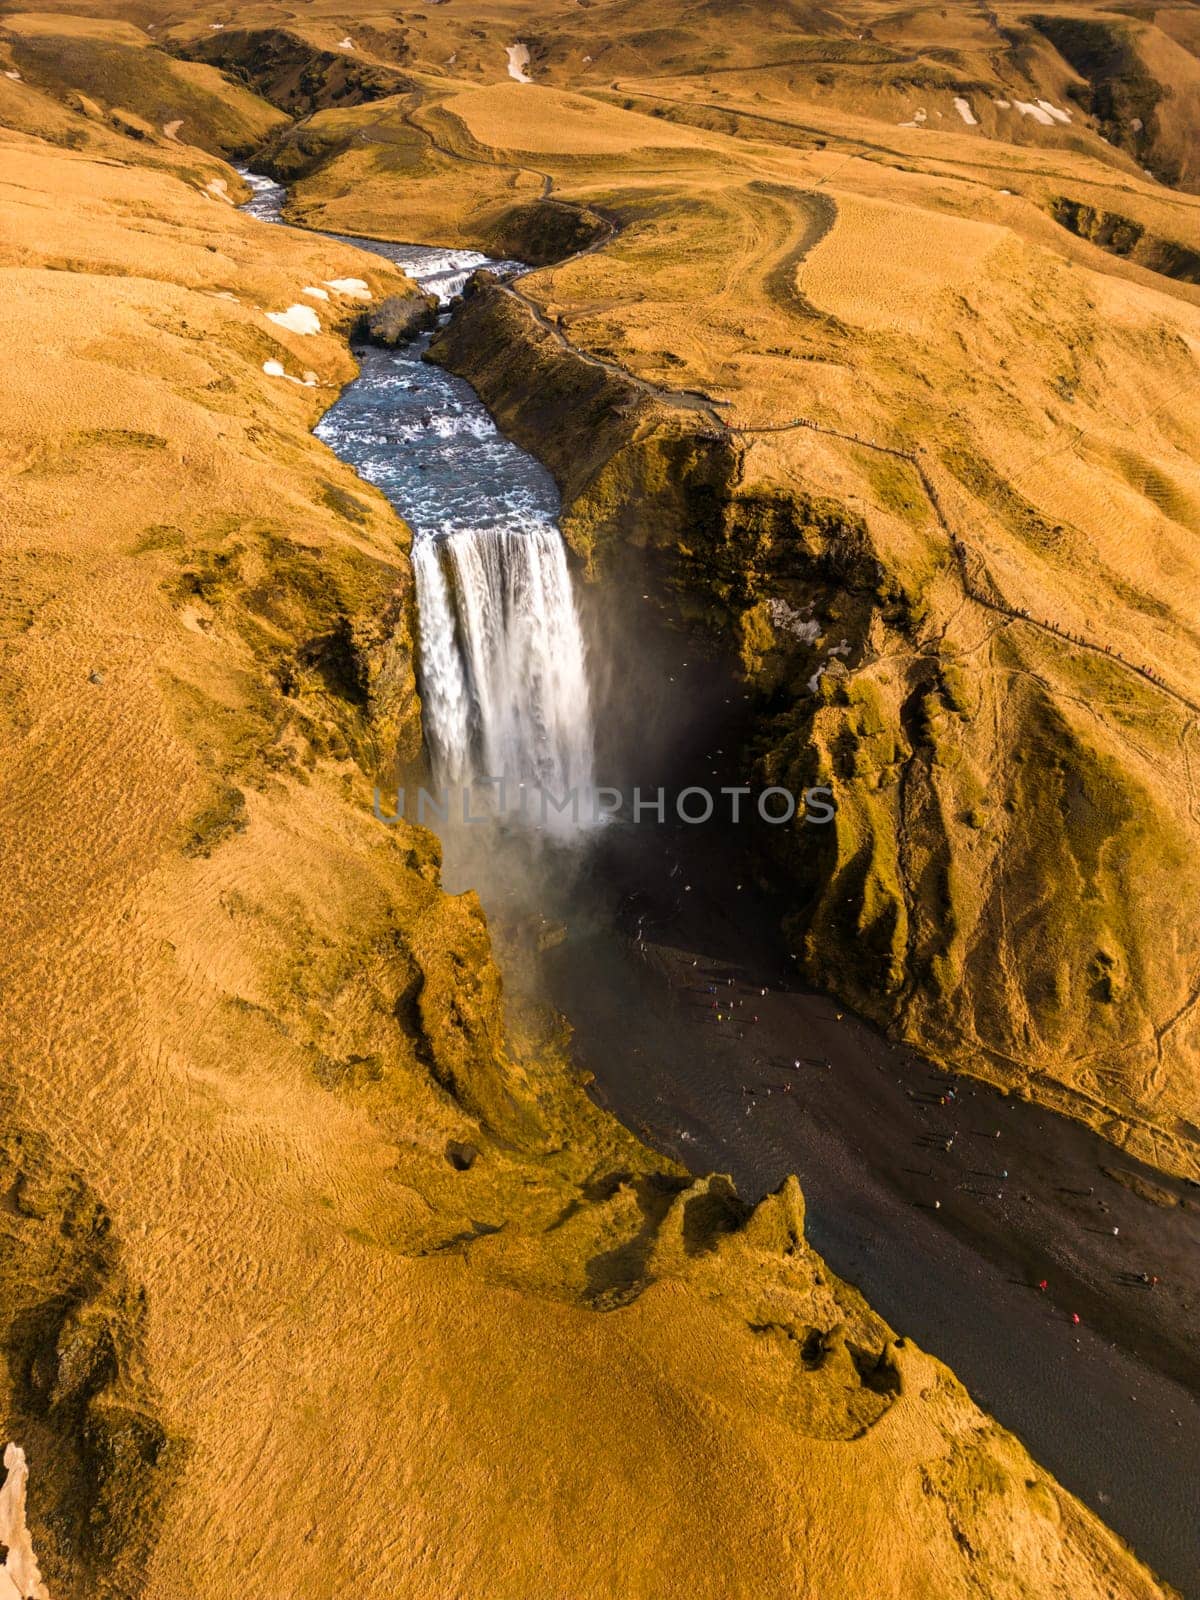 Drone shot of major waterfall in Iceland, with overflow of water falling down from magnificent brown stones. Beautiful scenery formed by amazing icelandic skgafoss cascade pouring over hills.